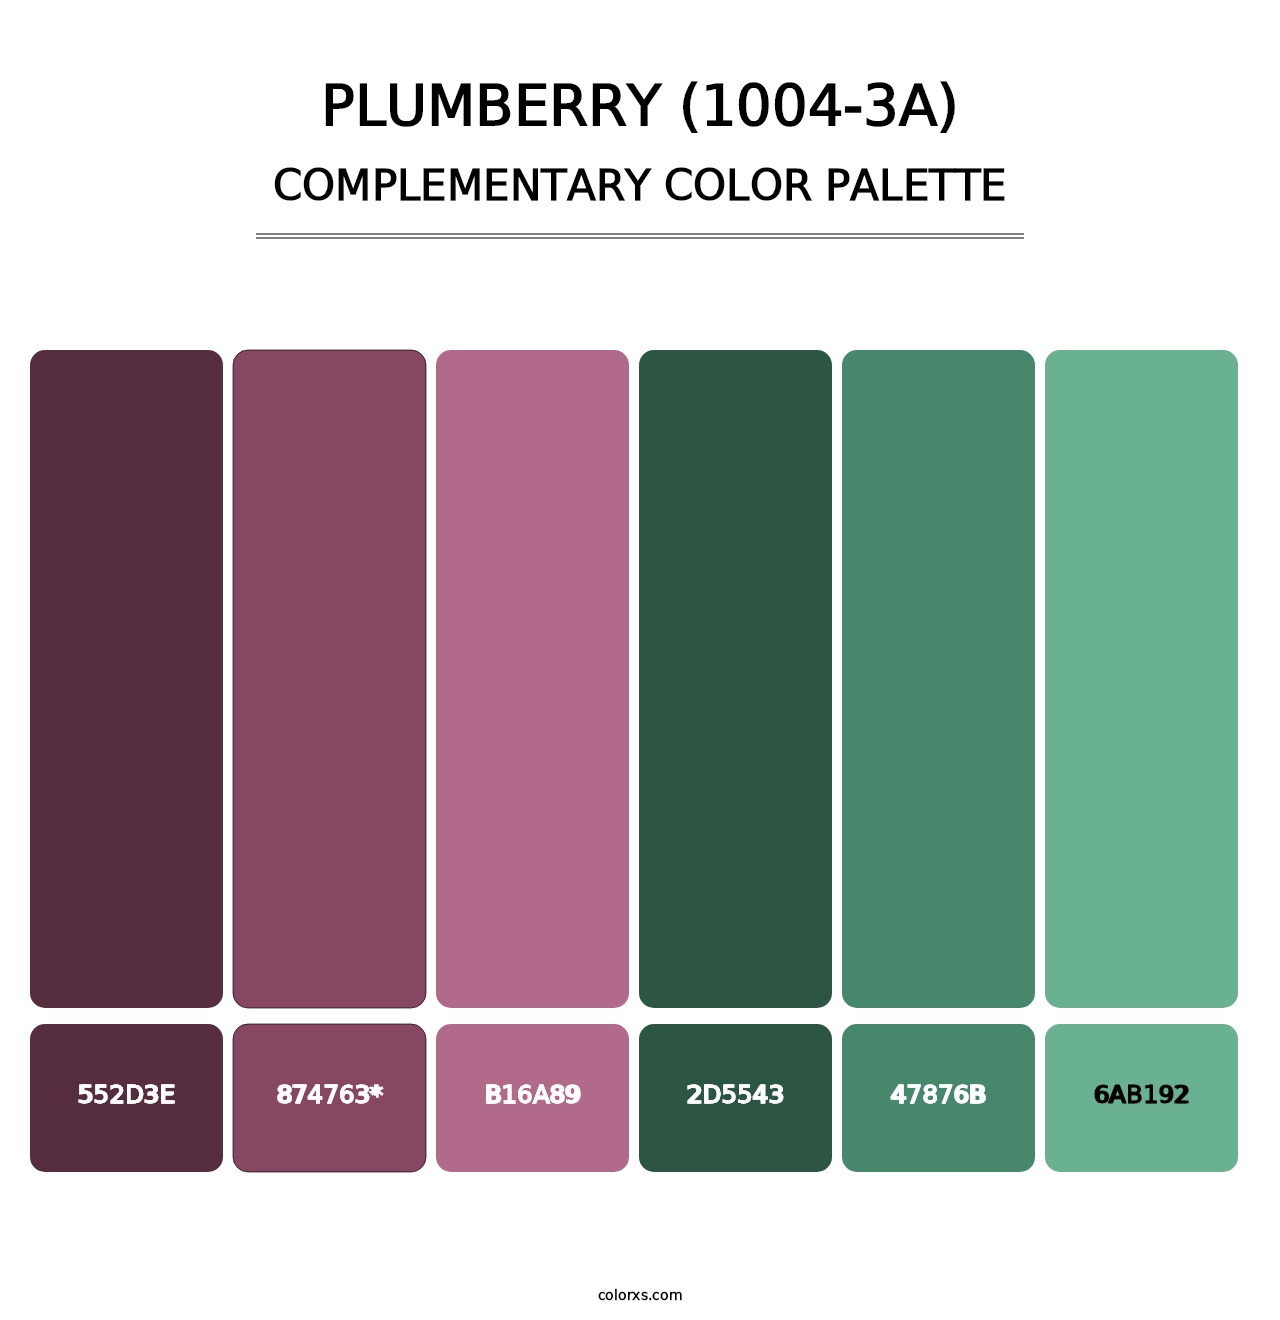 Plumberry (1004-3A) - Complementary Color Palette